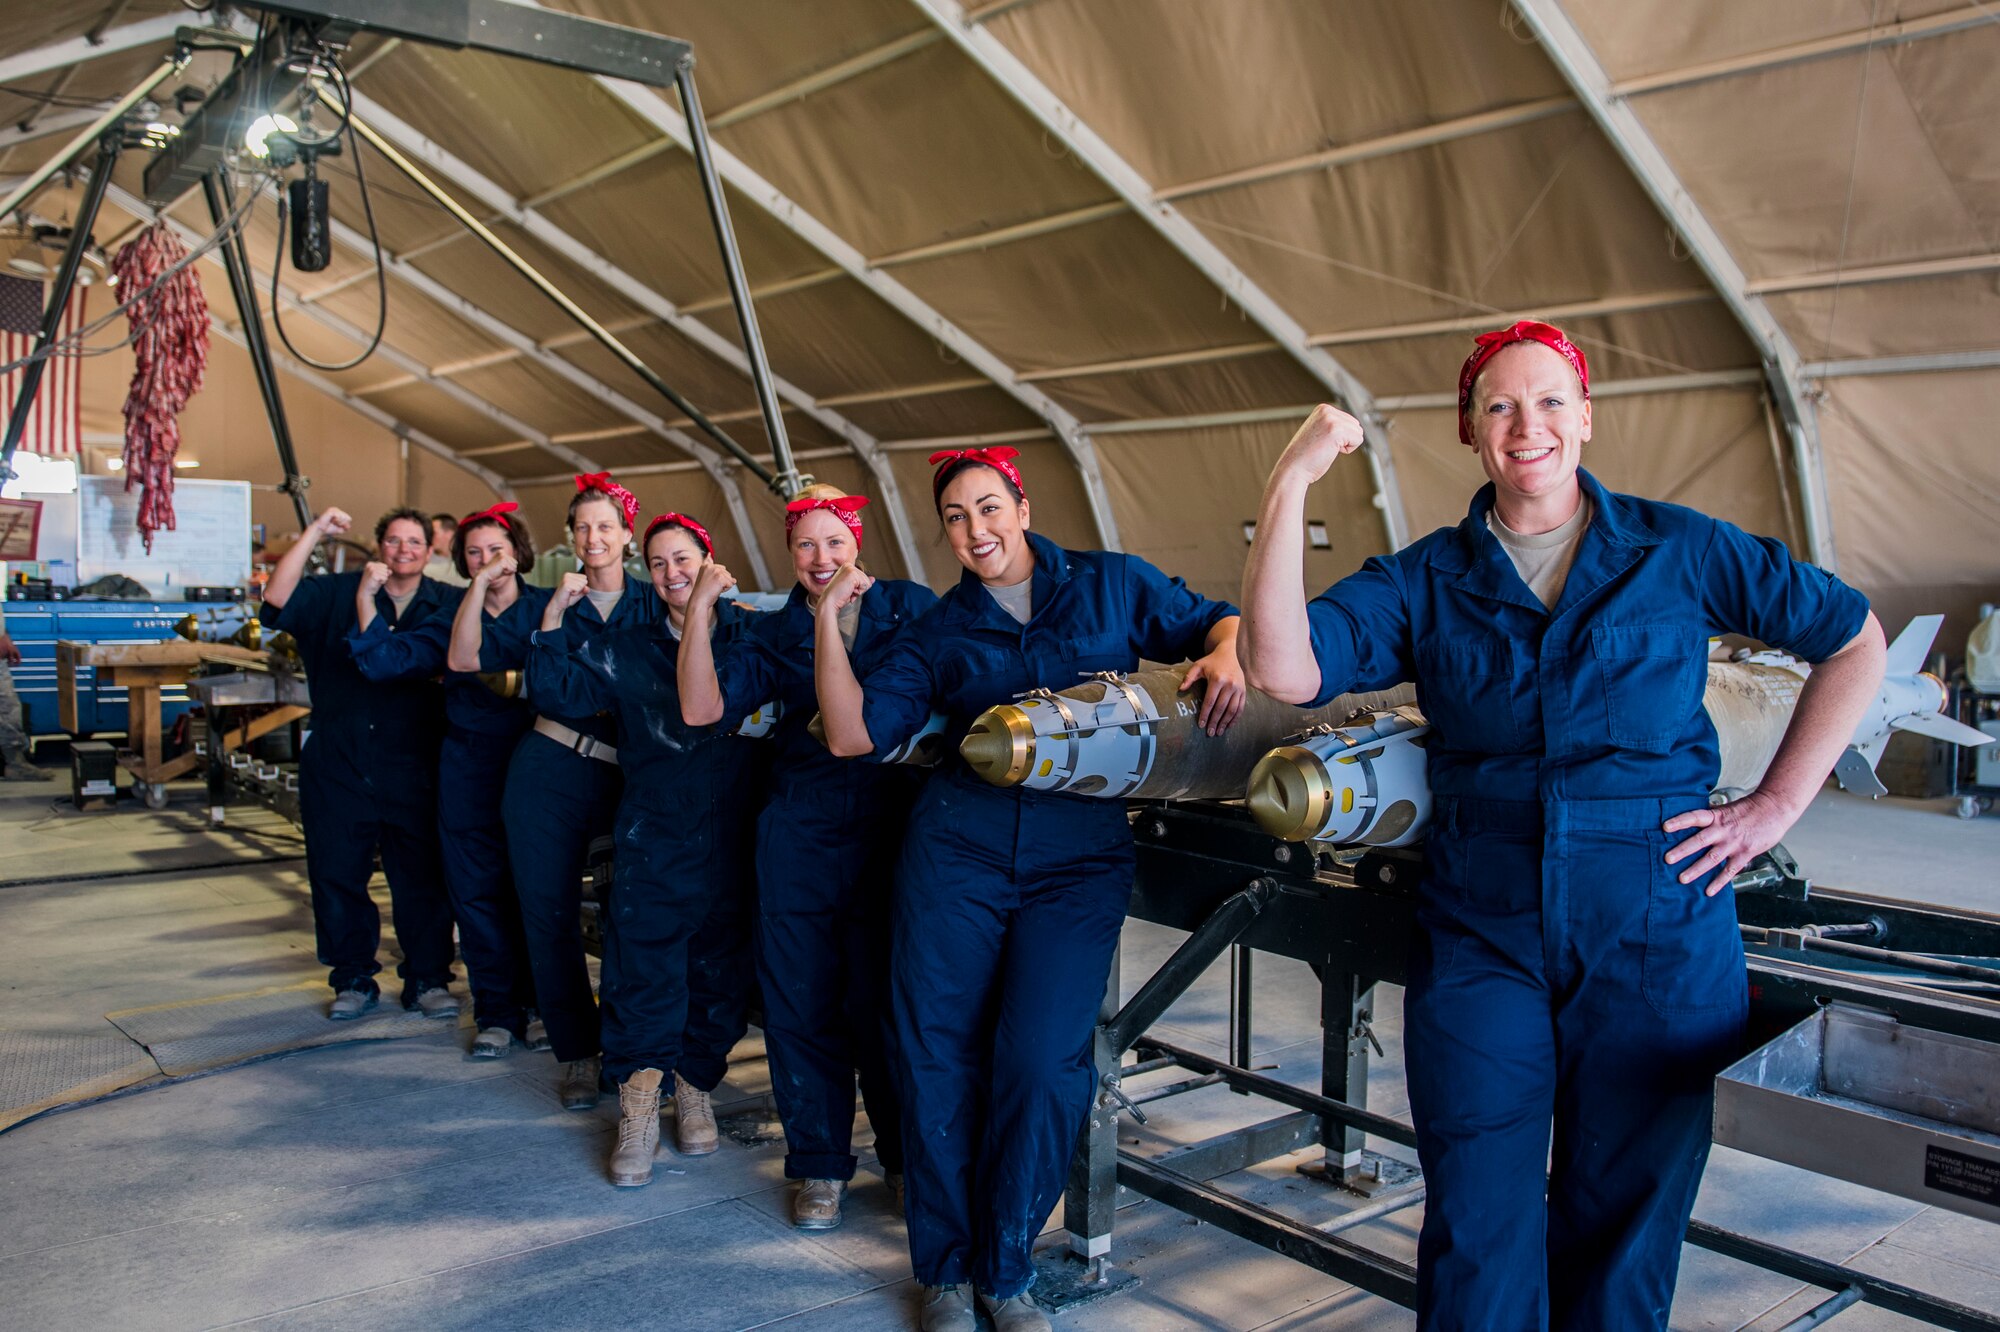 Women dressed as ‘Rosie the Riveter’ pose for a photo with GBU-38 bombs Mar. 7, 2017, in Southwest Asia. These women are Airmen in the U.S. Air Force and built a dozen bombs in honor of Women’s History Month. (U.S. Air Force photo by Staff Sgt. Eboni Reams)